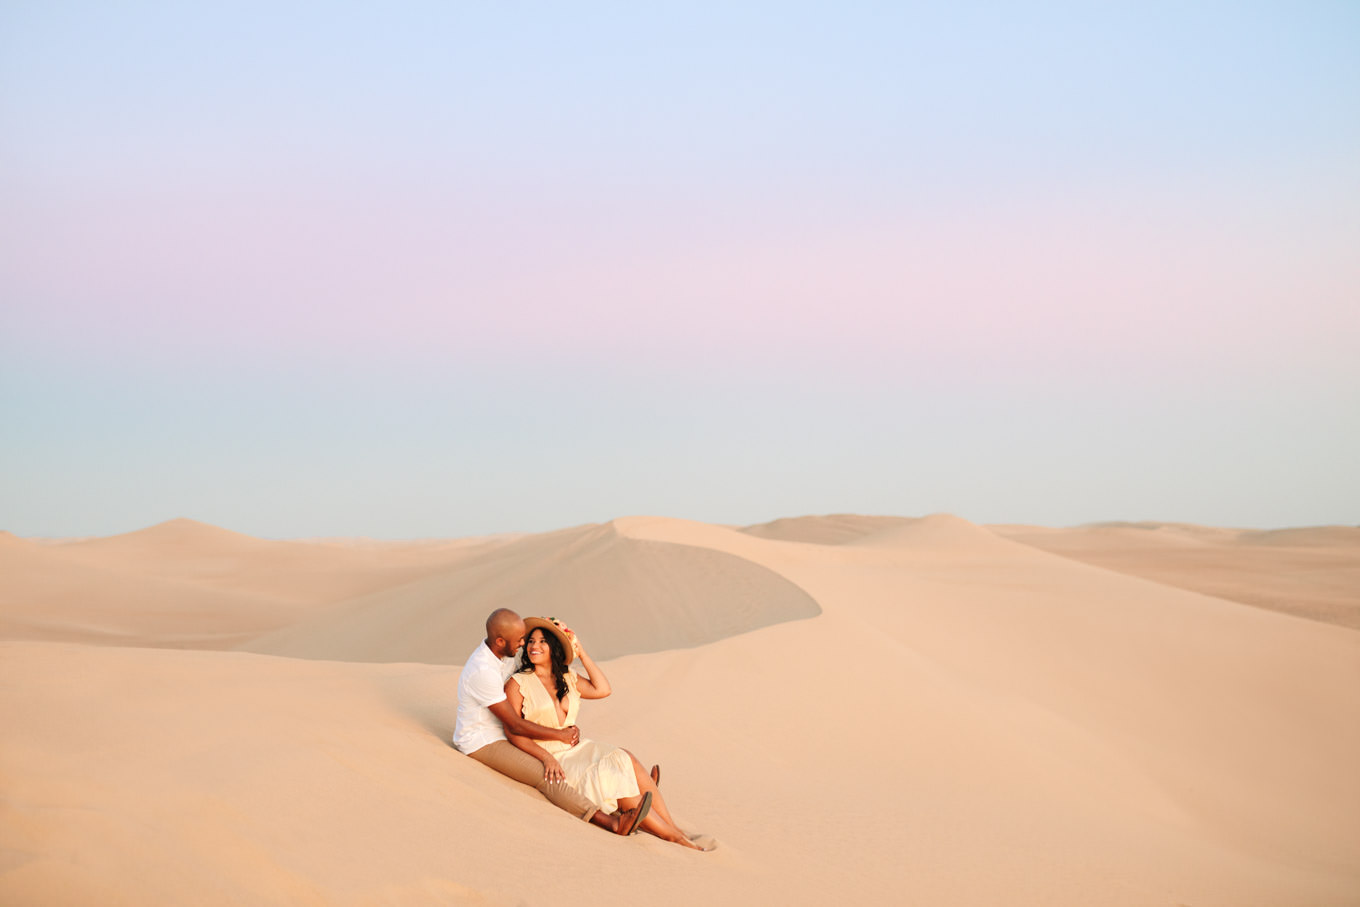 Glamis Sand Dunes engagement session | Engagement, elopement, and wedding photography roundup of Mary Costa’s favorite images from 2020 | Colorful and elevated photography for fun-loving couples in Southern California | #2020wedding #elopement #weddingphoto #weddingphotography #microwedding   Source: Mary Costa Photography | Los Angeles